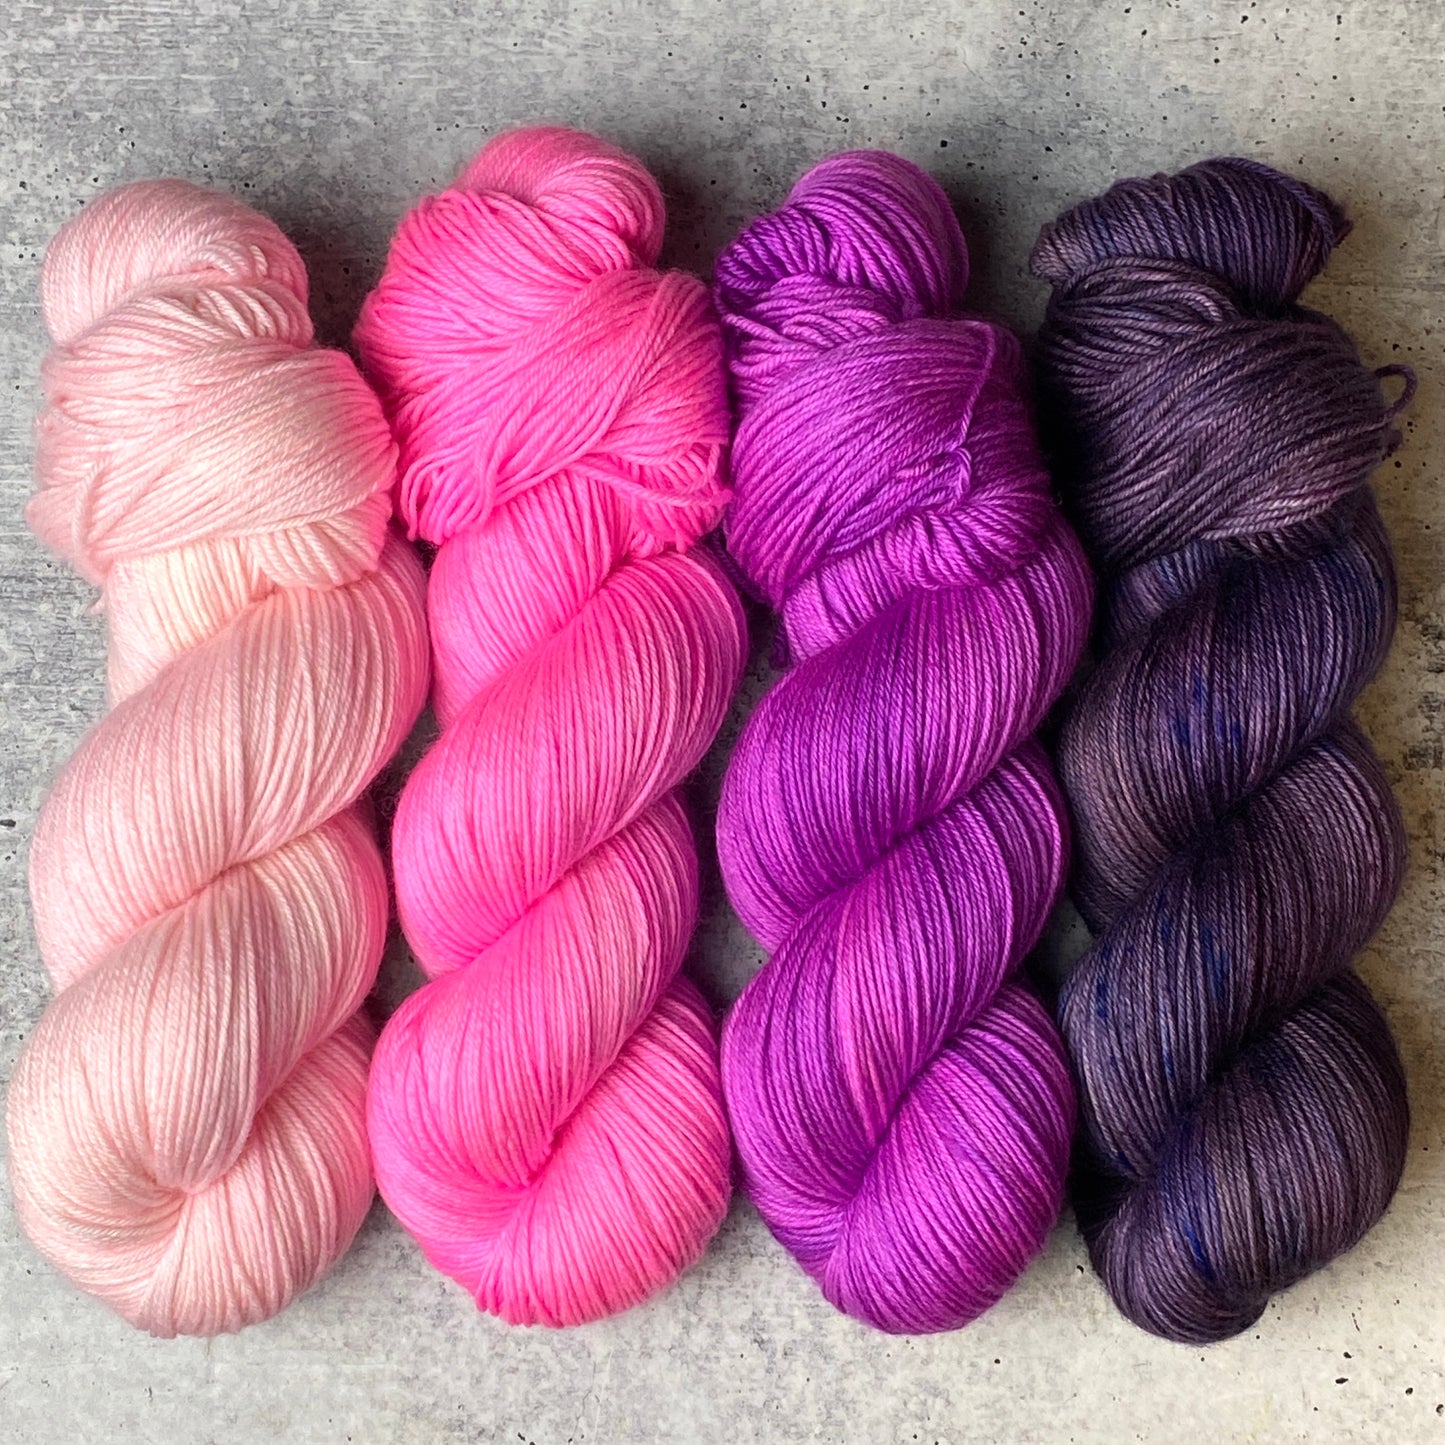 Geogradient Kit “Dyer’s Choice” on Luxe Fingering - Ready to Ship